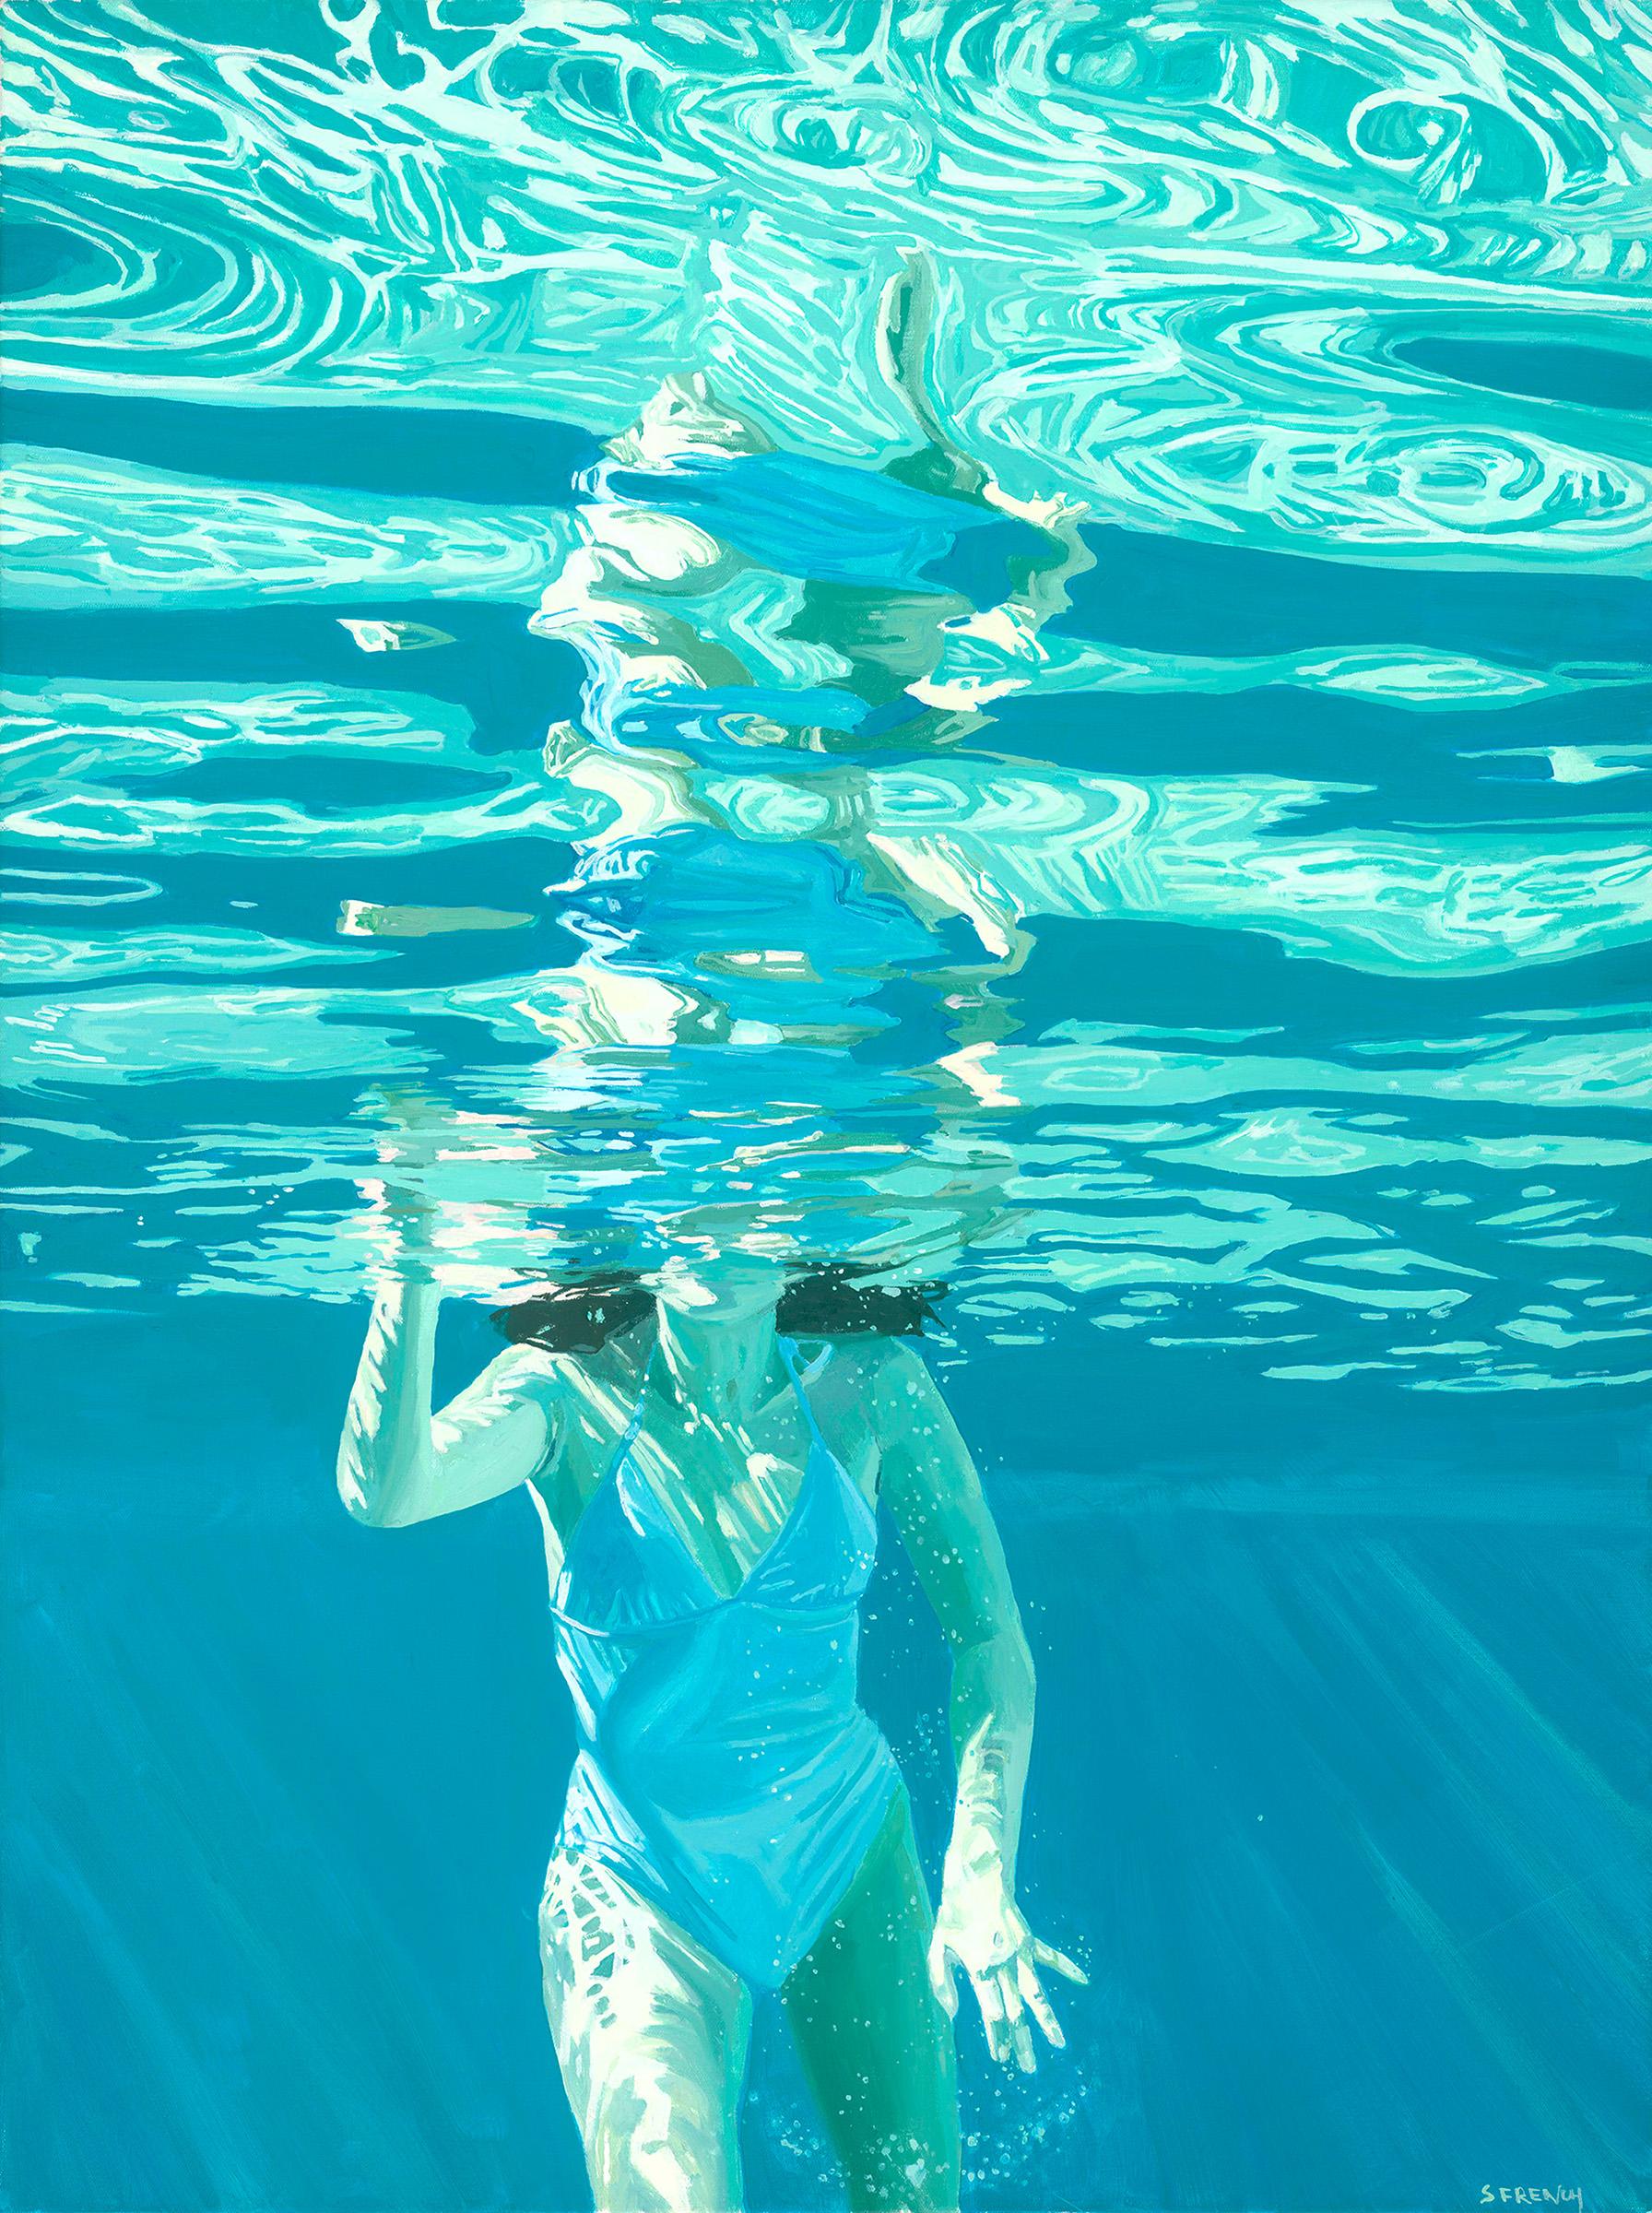 Samantha French Figurative Painting - Soak In Soundless: Figurative Photorealist Painting of Swimmer in Aqua Pool   